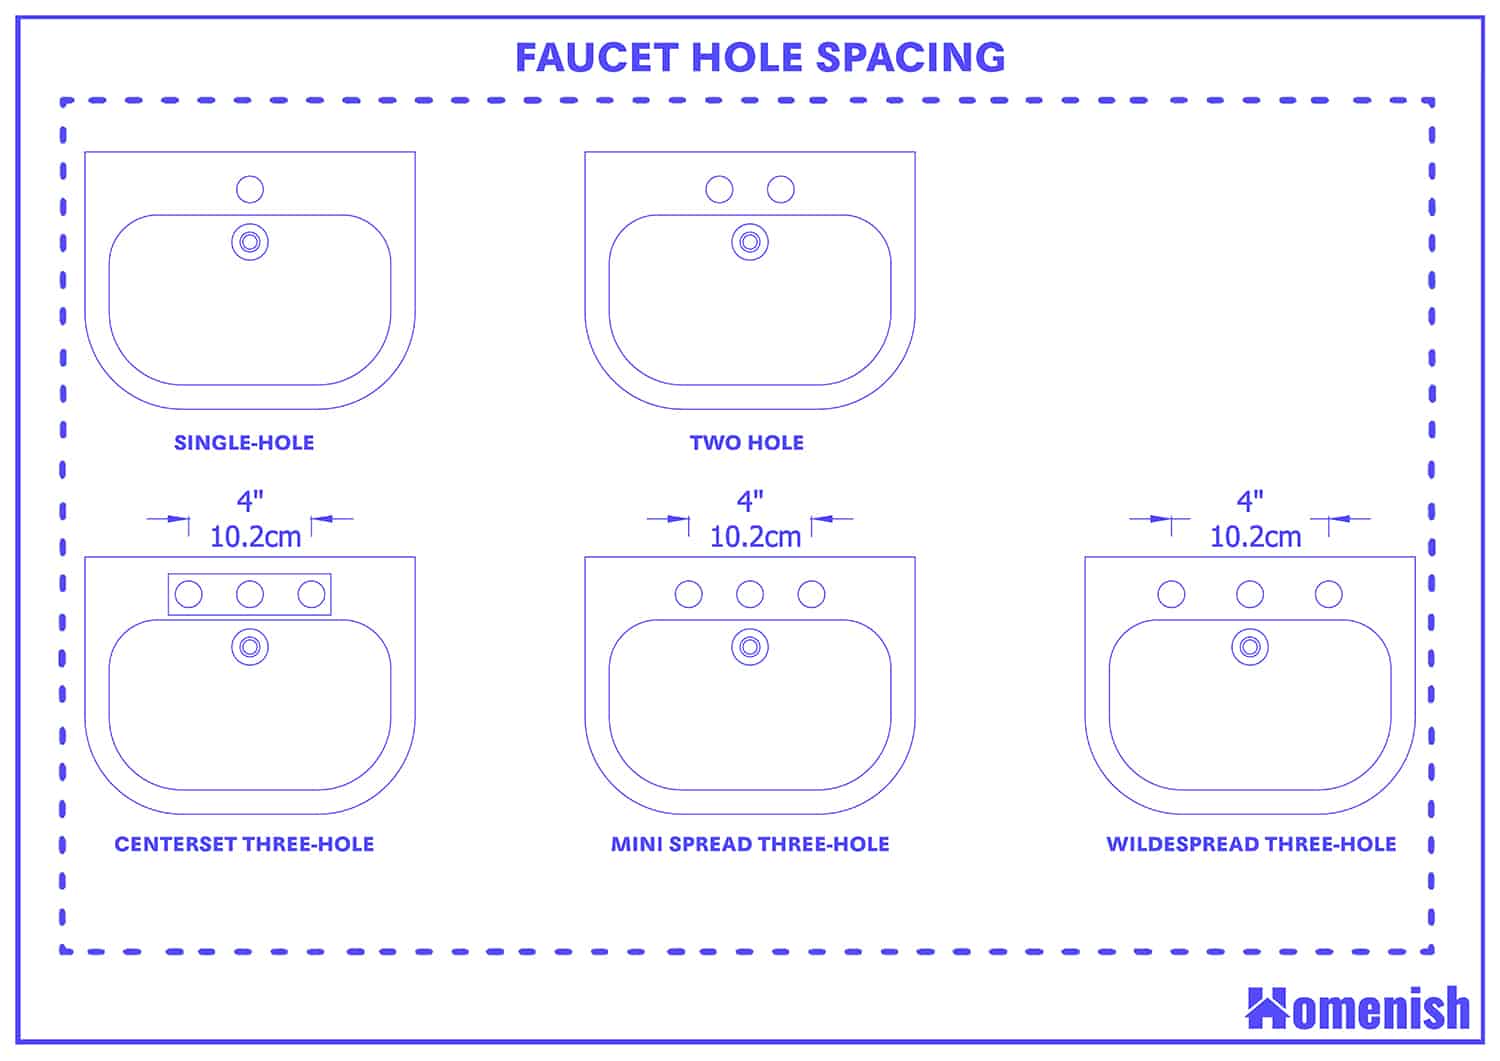 Faucet hole spacing